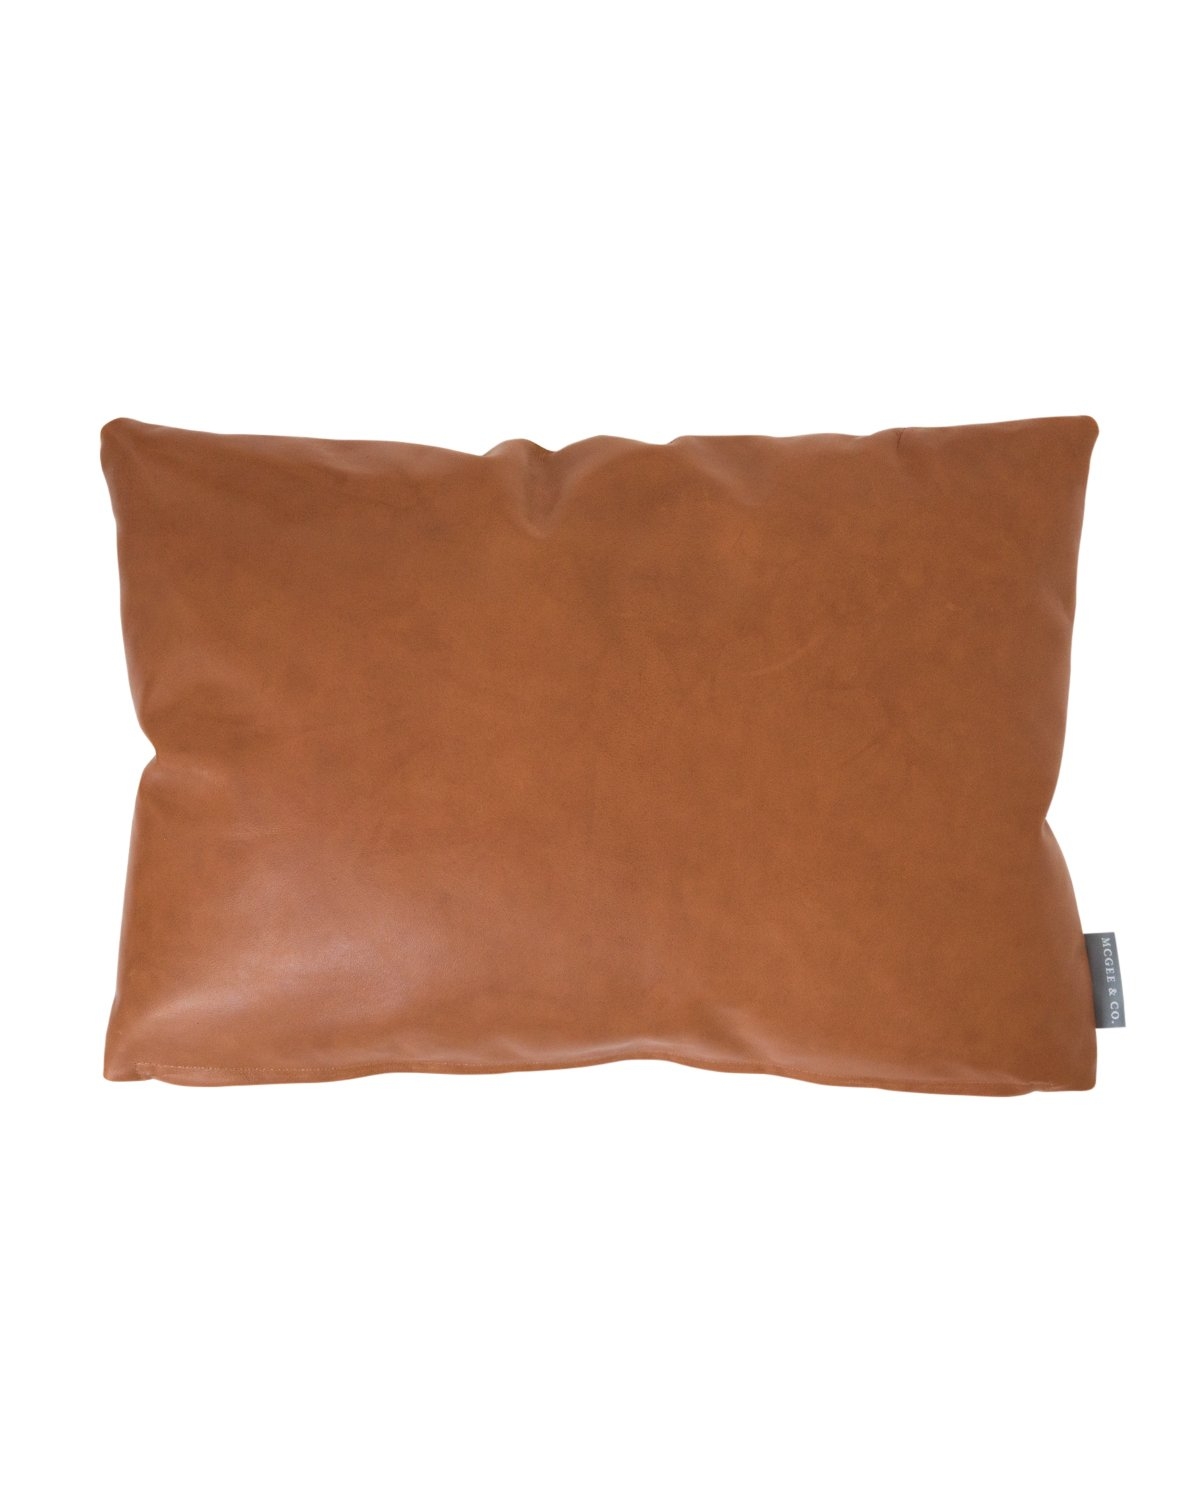 COGNAC LEATHER PILLOW COVER WITH DOWN INSERT, 14" x 20" - Image 0